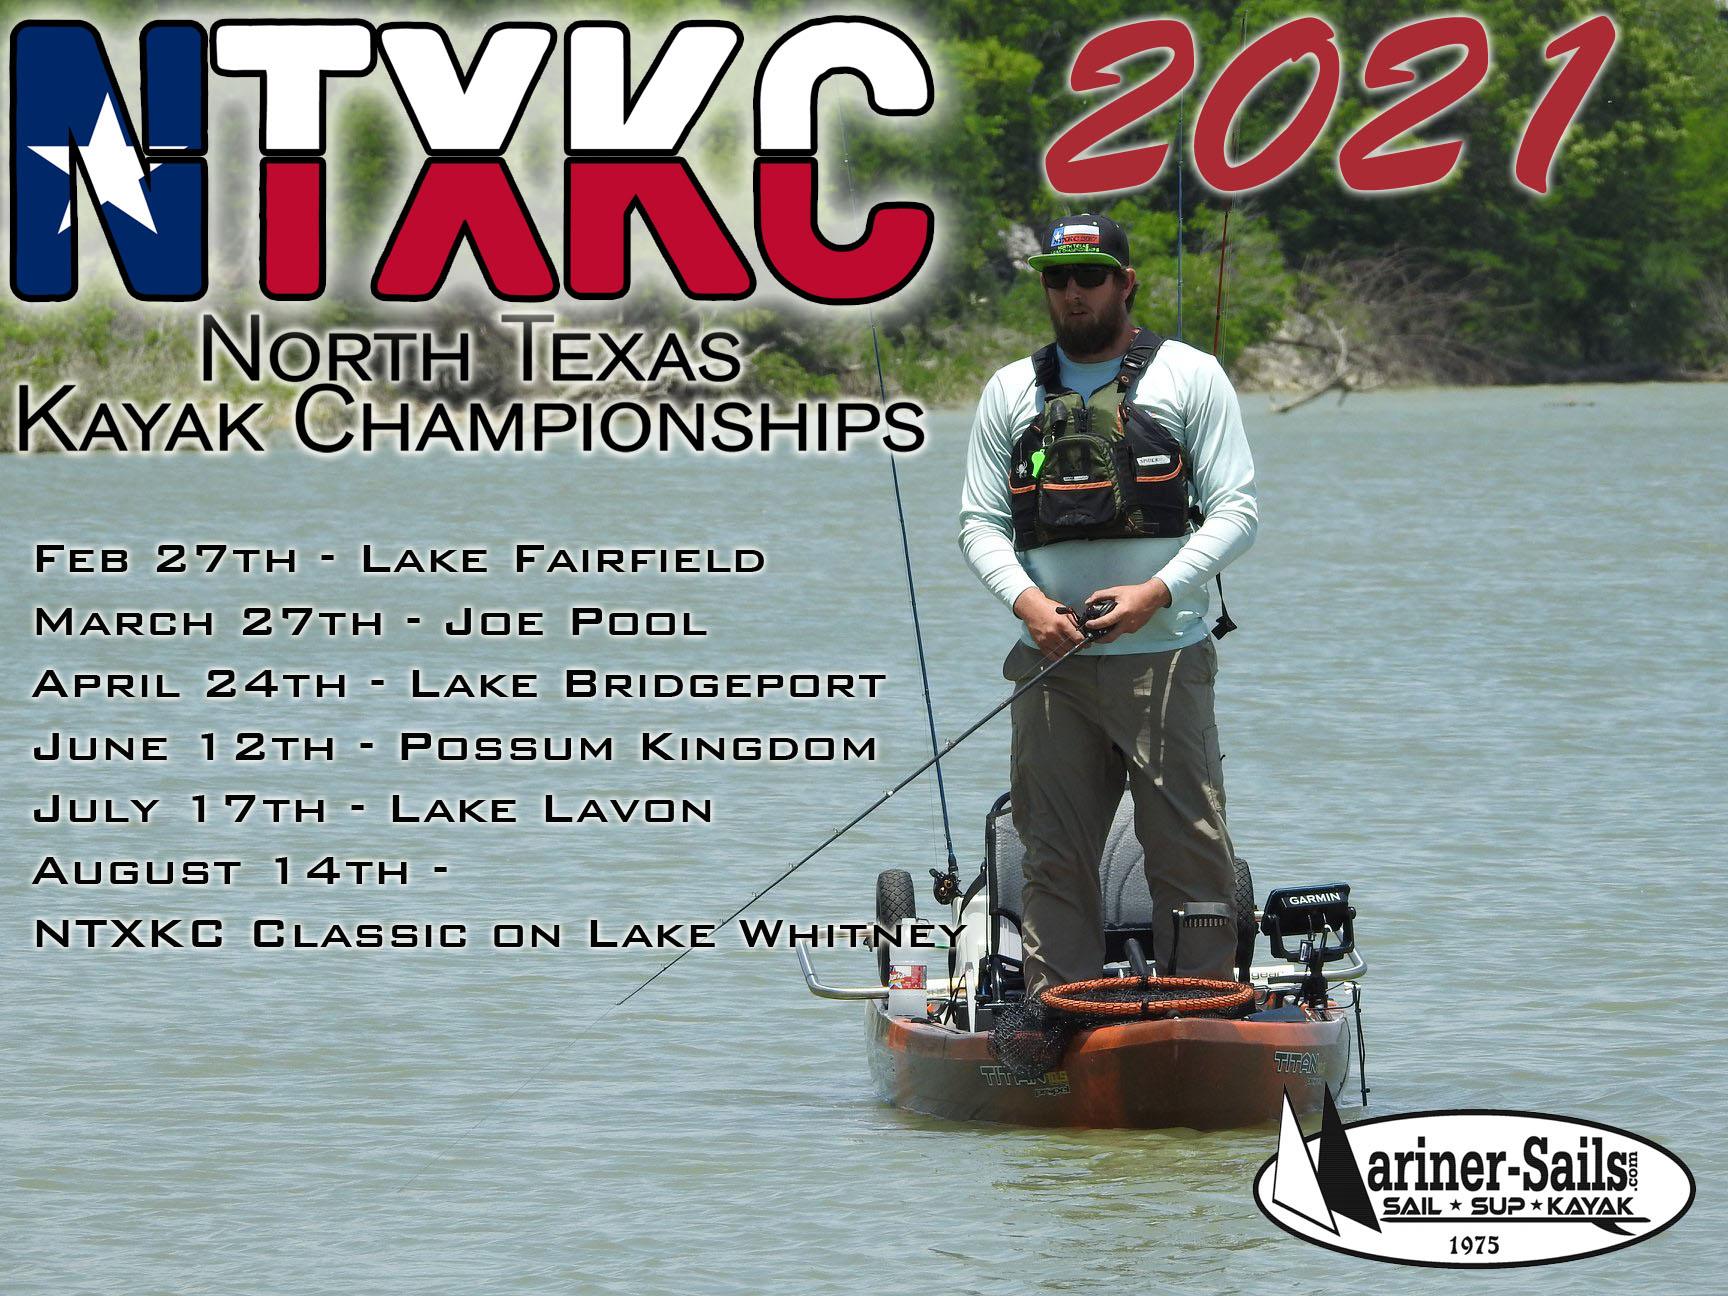 The 2021 schedule for NTXKC